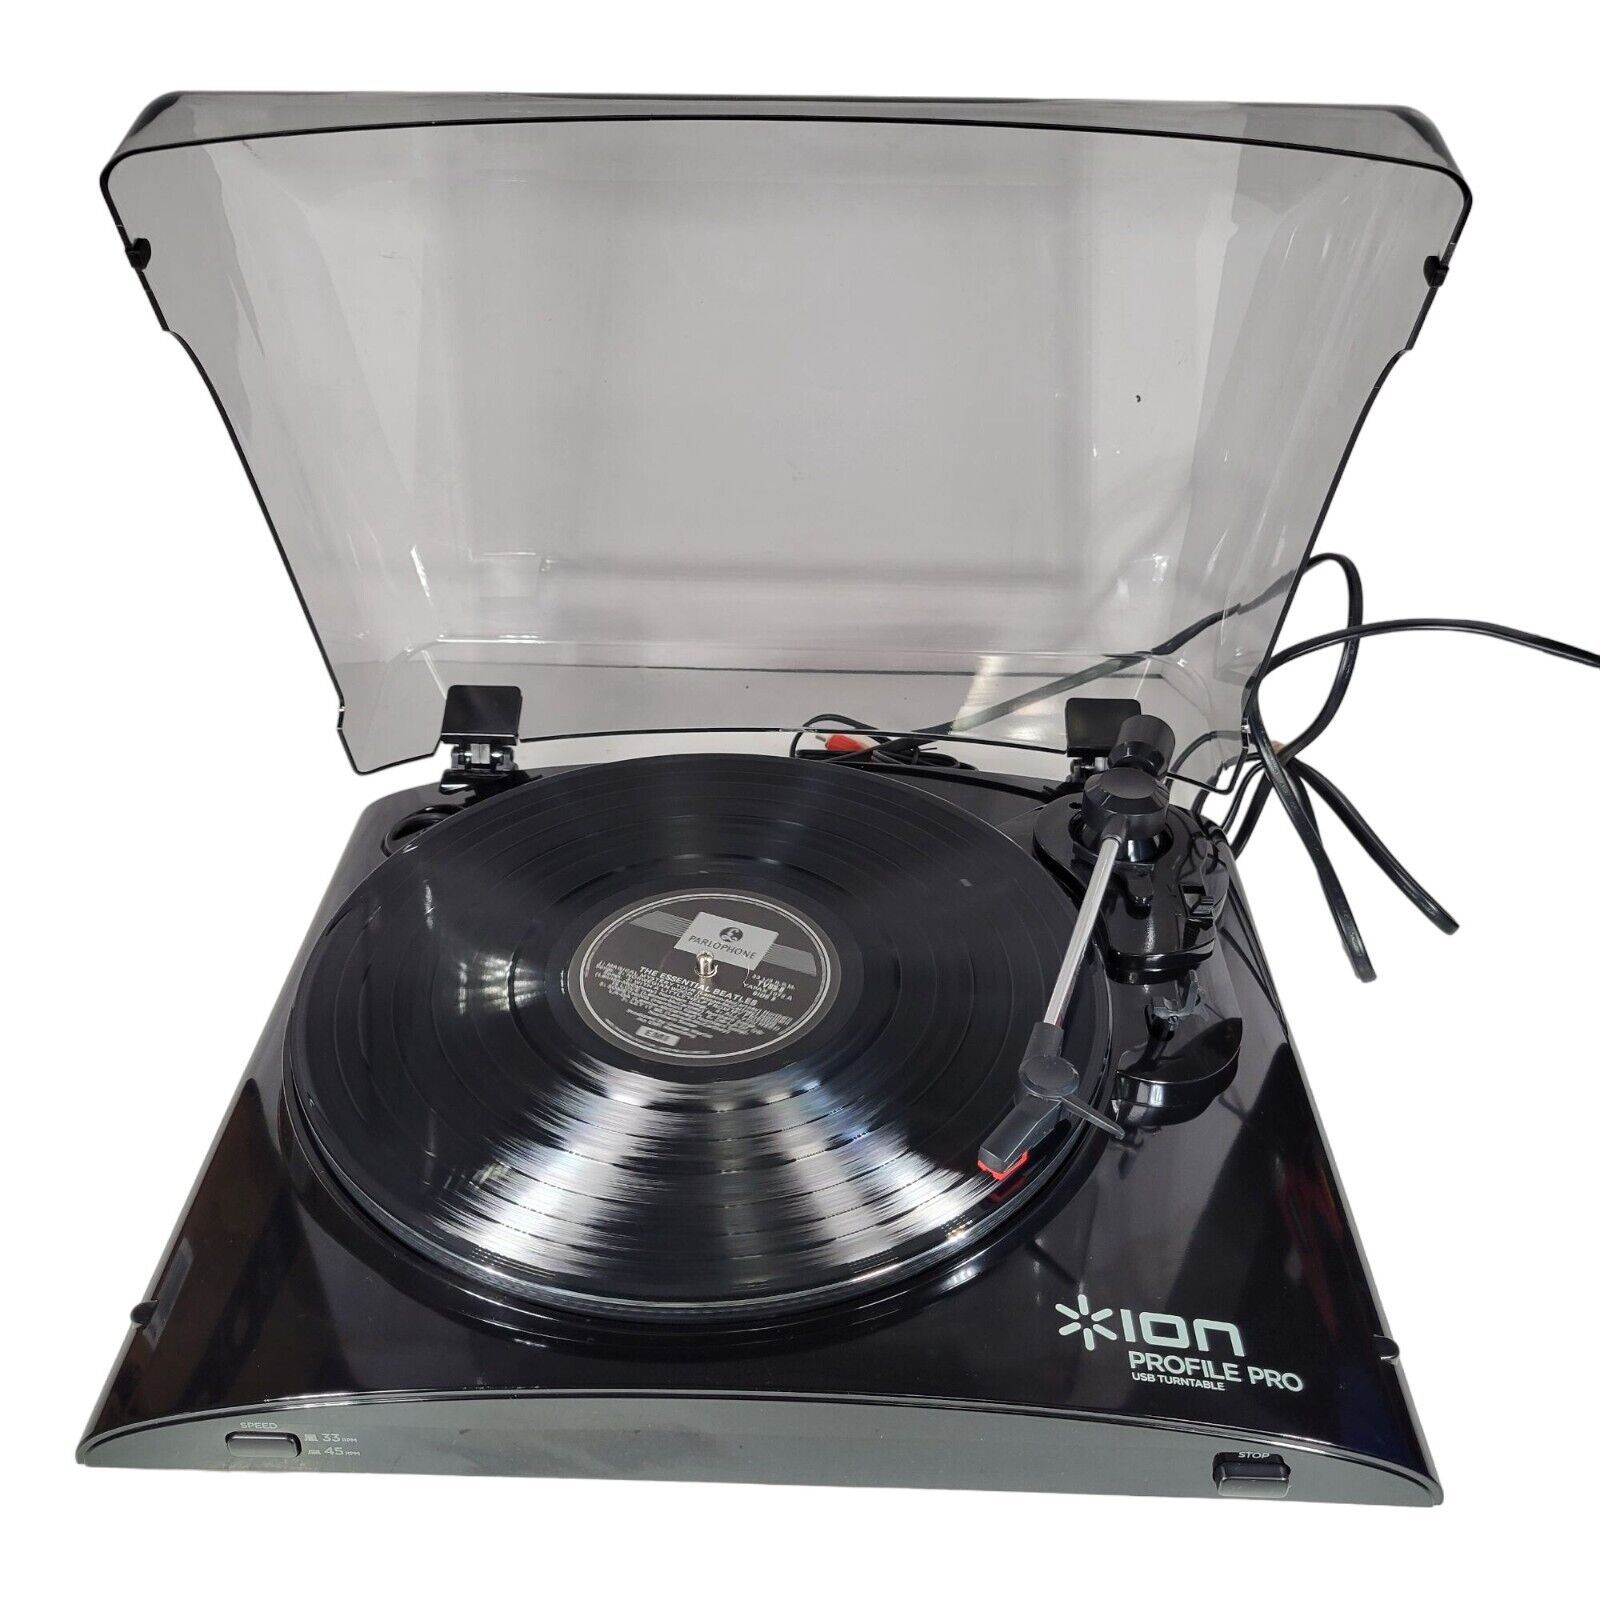 ION PROFILE LP Vinyl Conversion Turntable Turn your Records into MP3s & Listen - $40.87